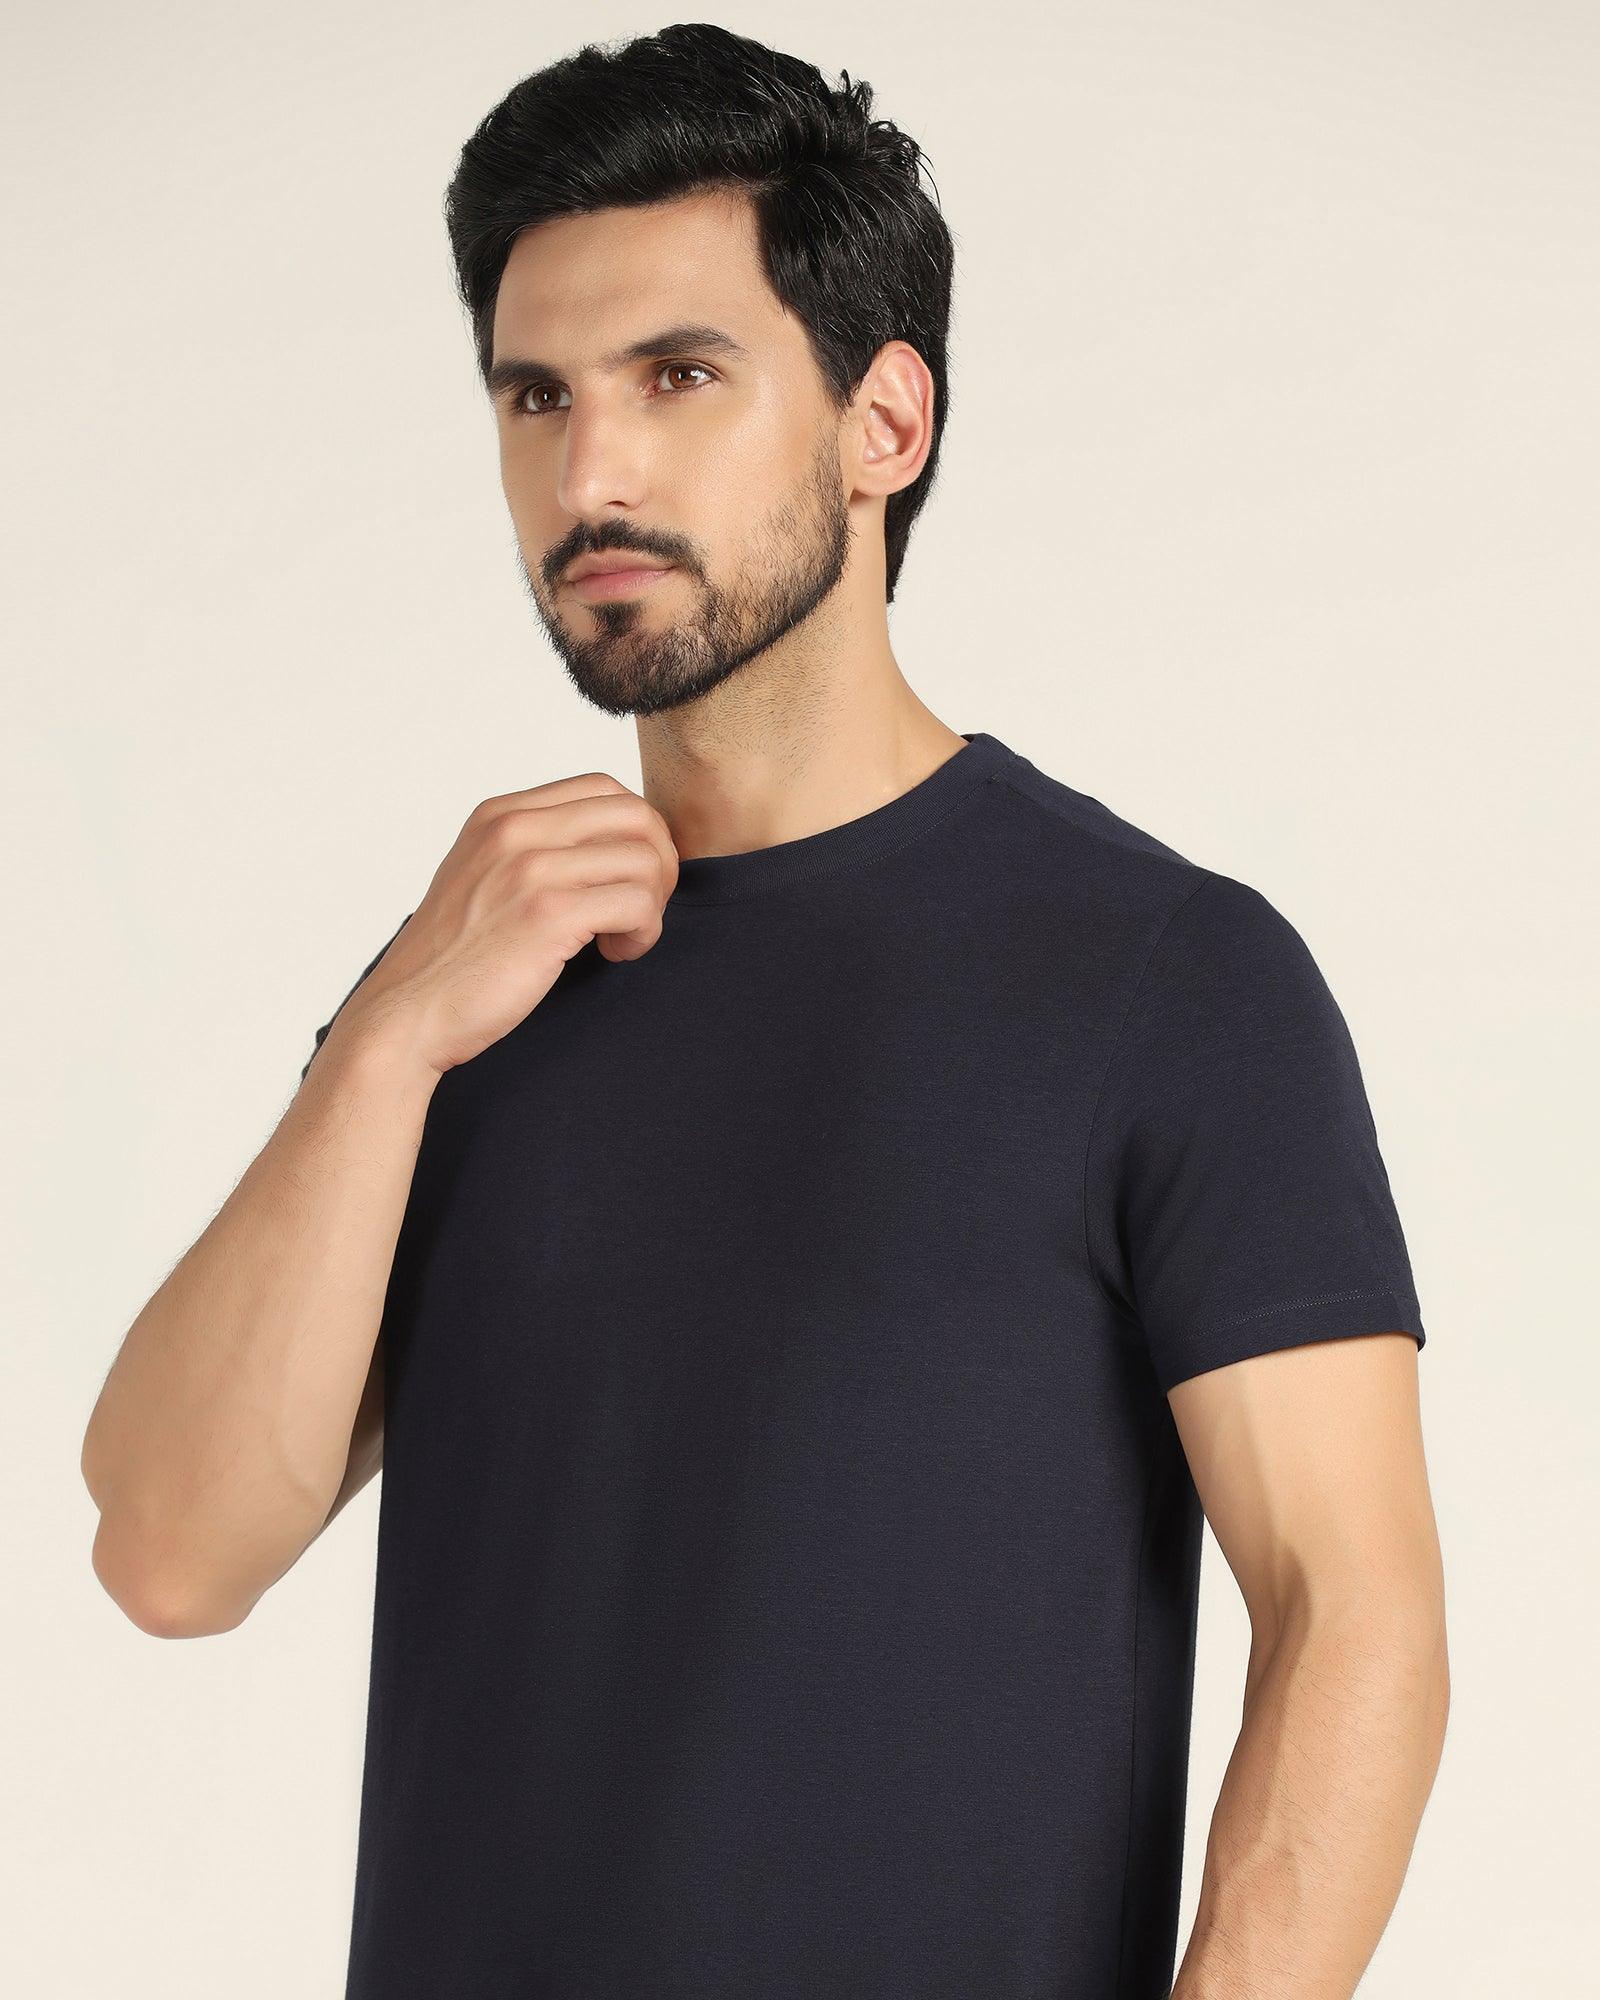 Crew Neck Navy Solid T Shirt - Holan